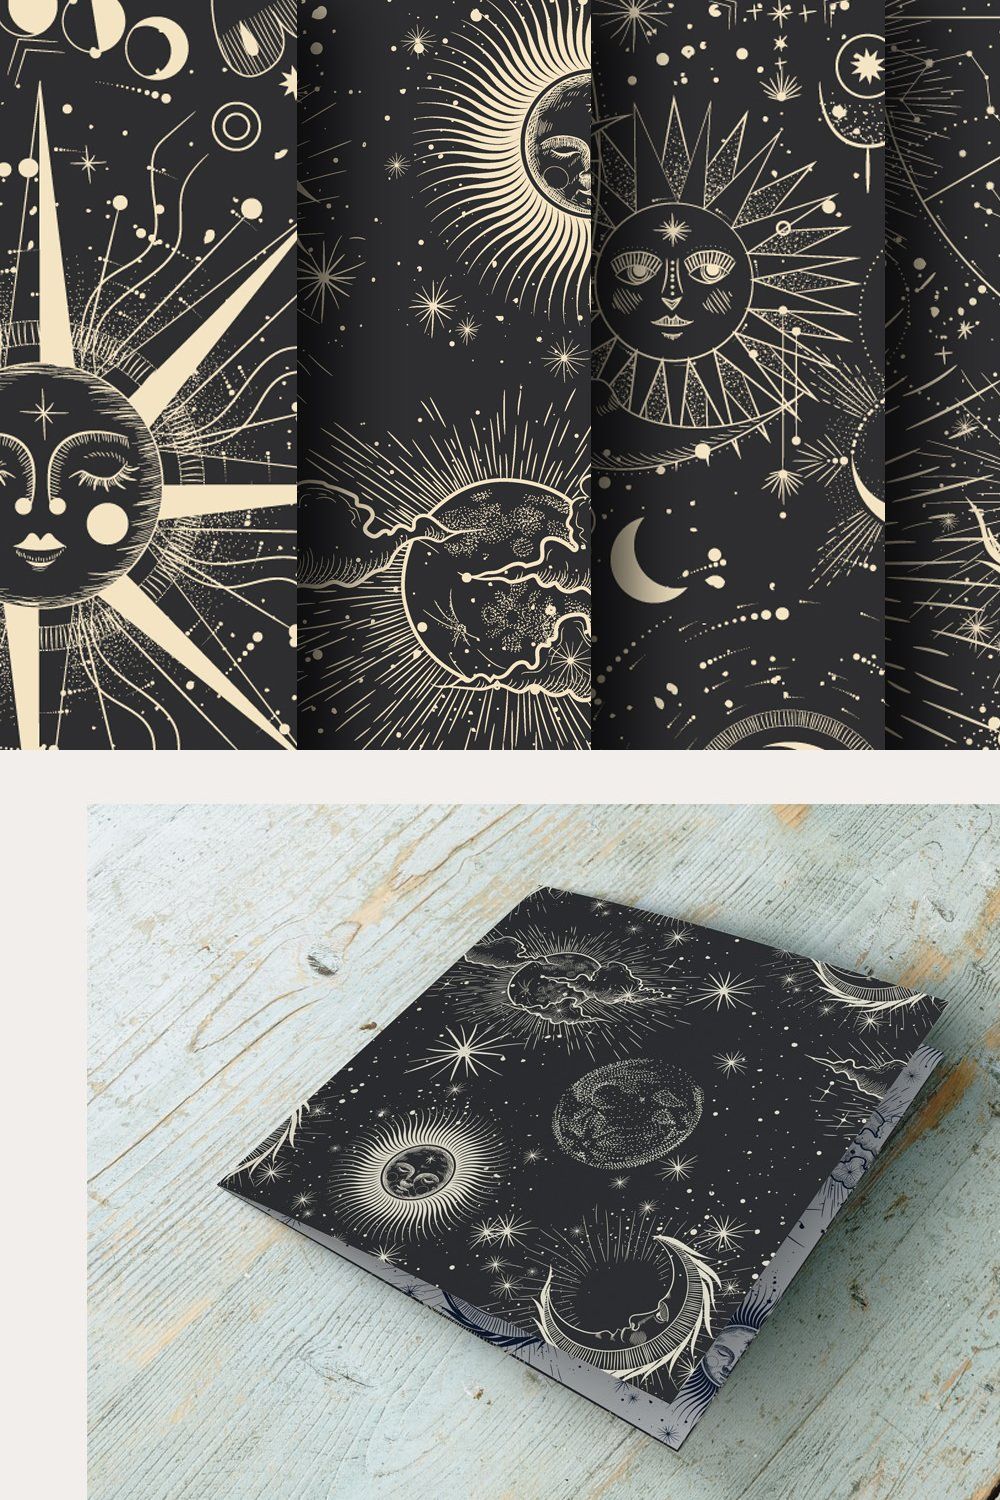 Space pattern set pinterest preview image.